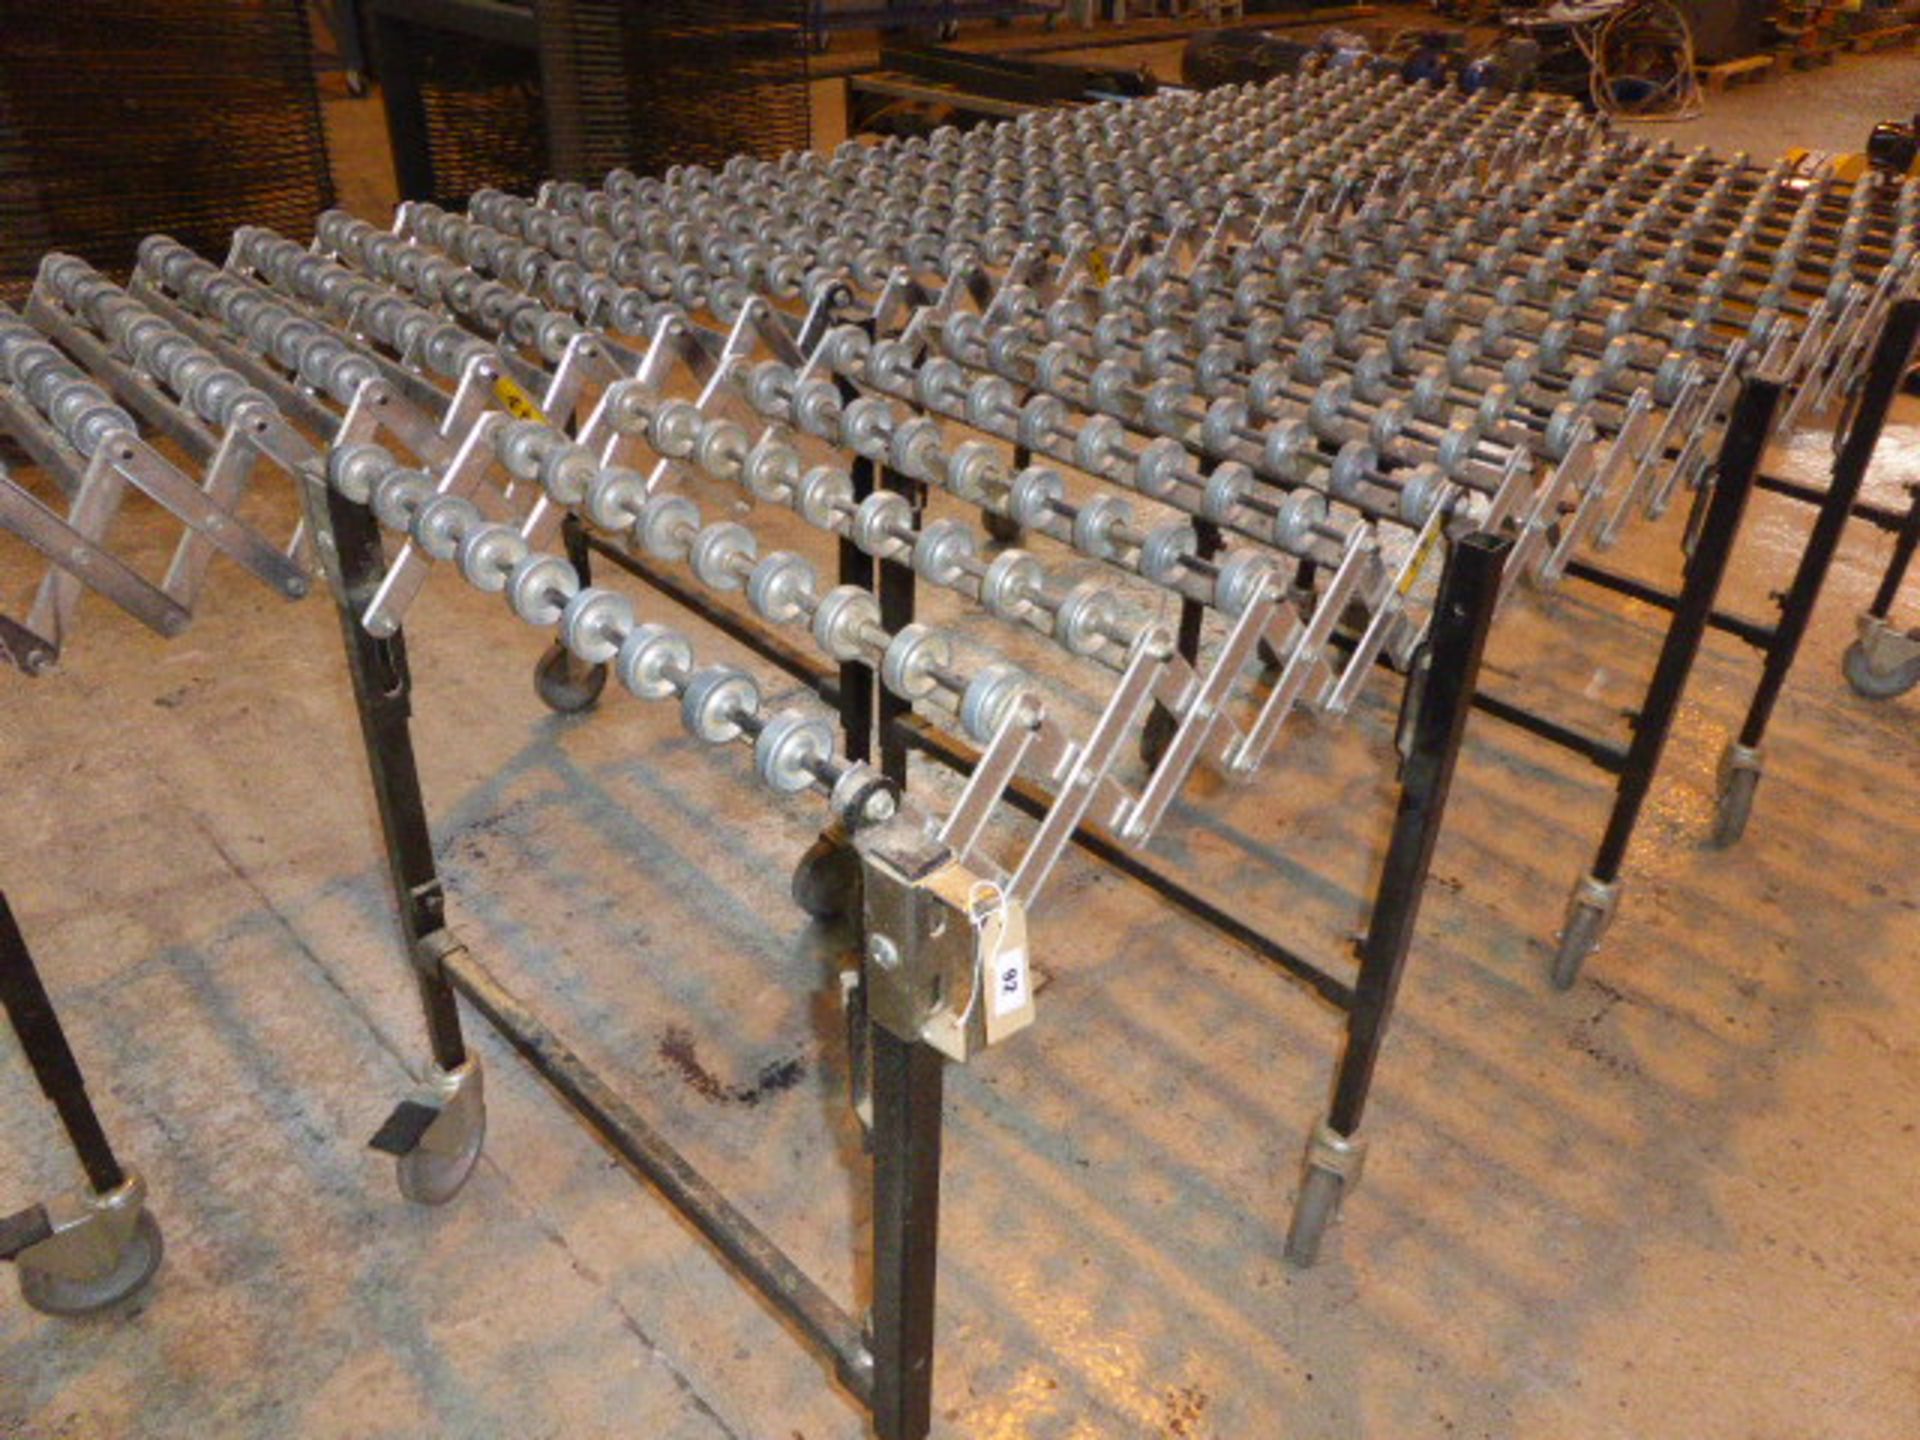 2 sections of expandable roller conveyor on castors